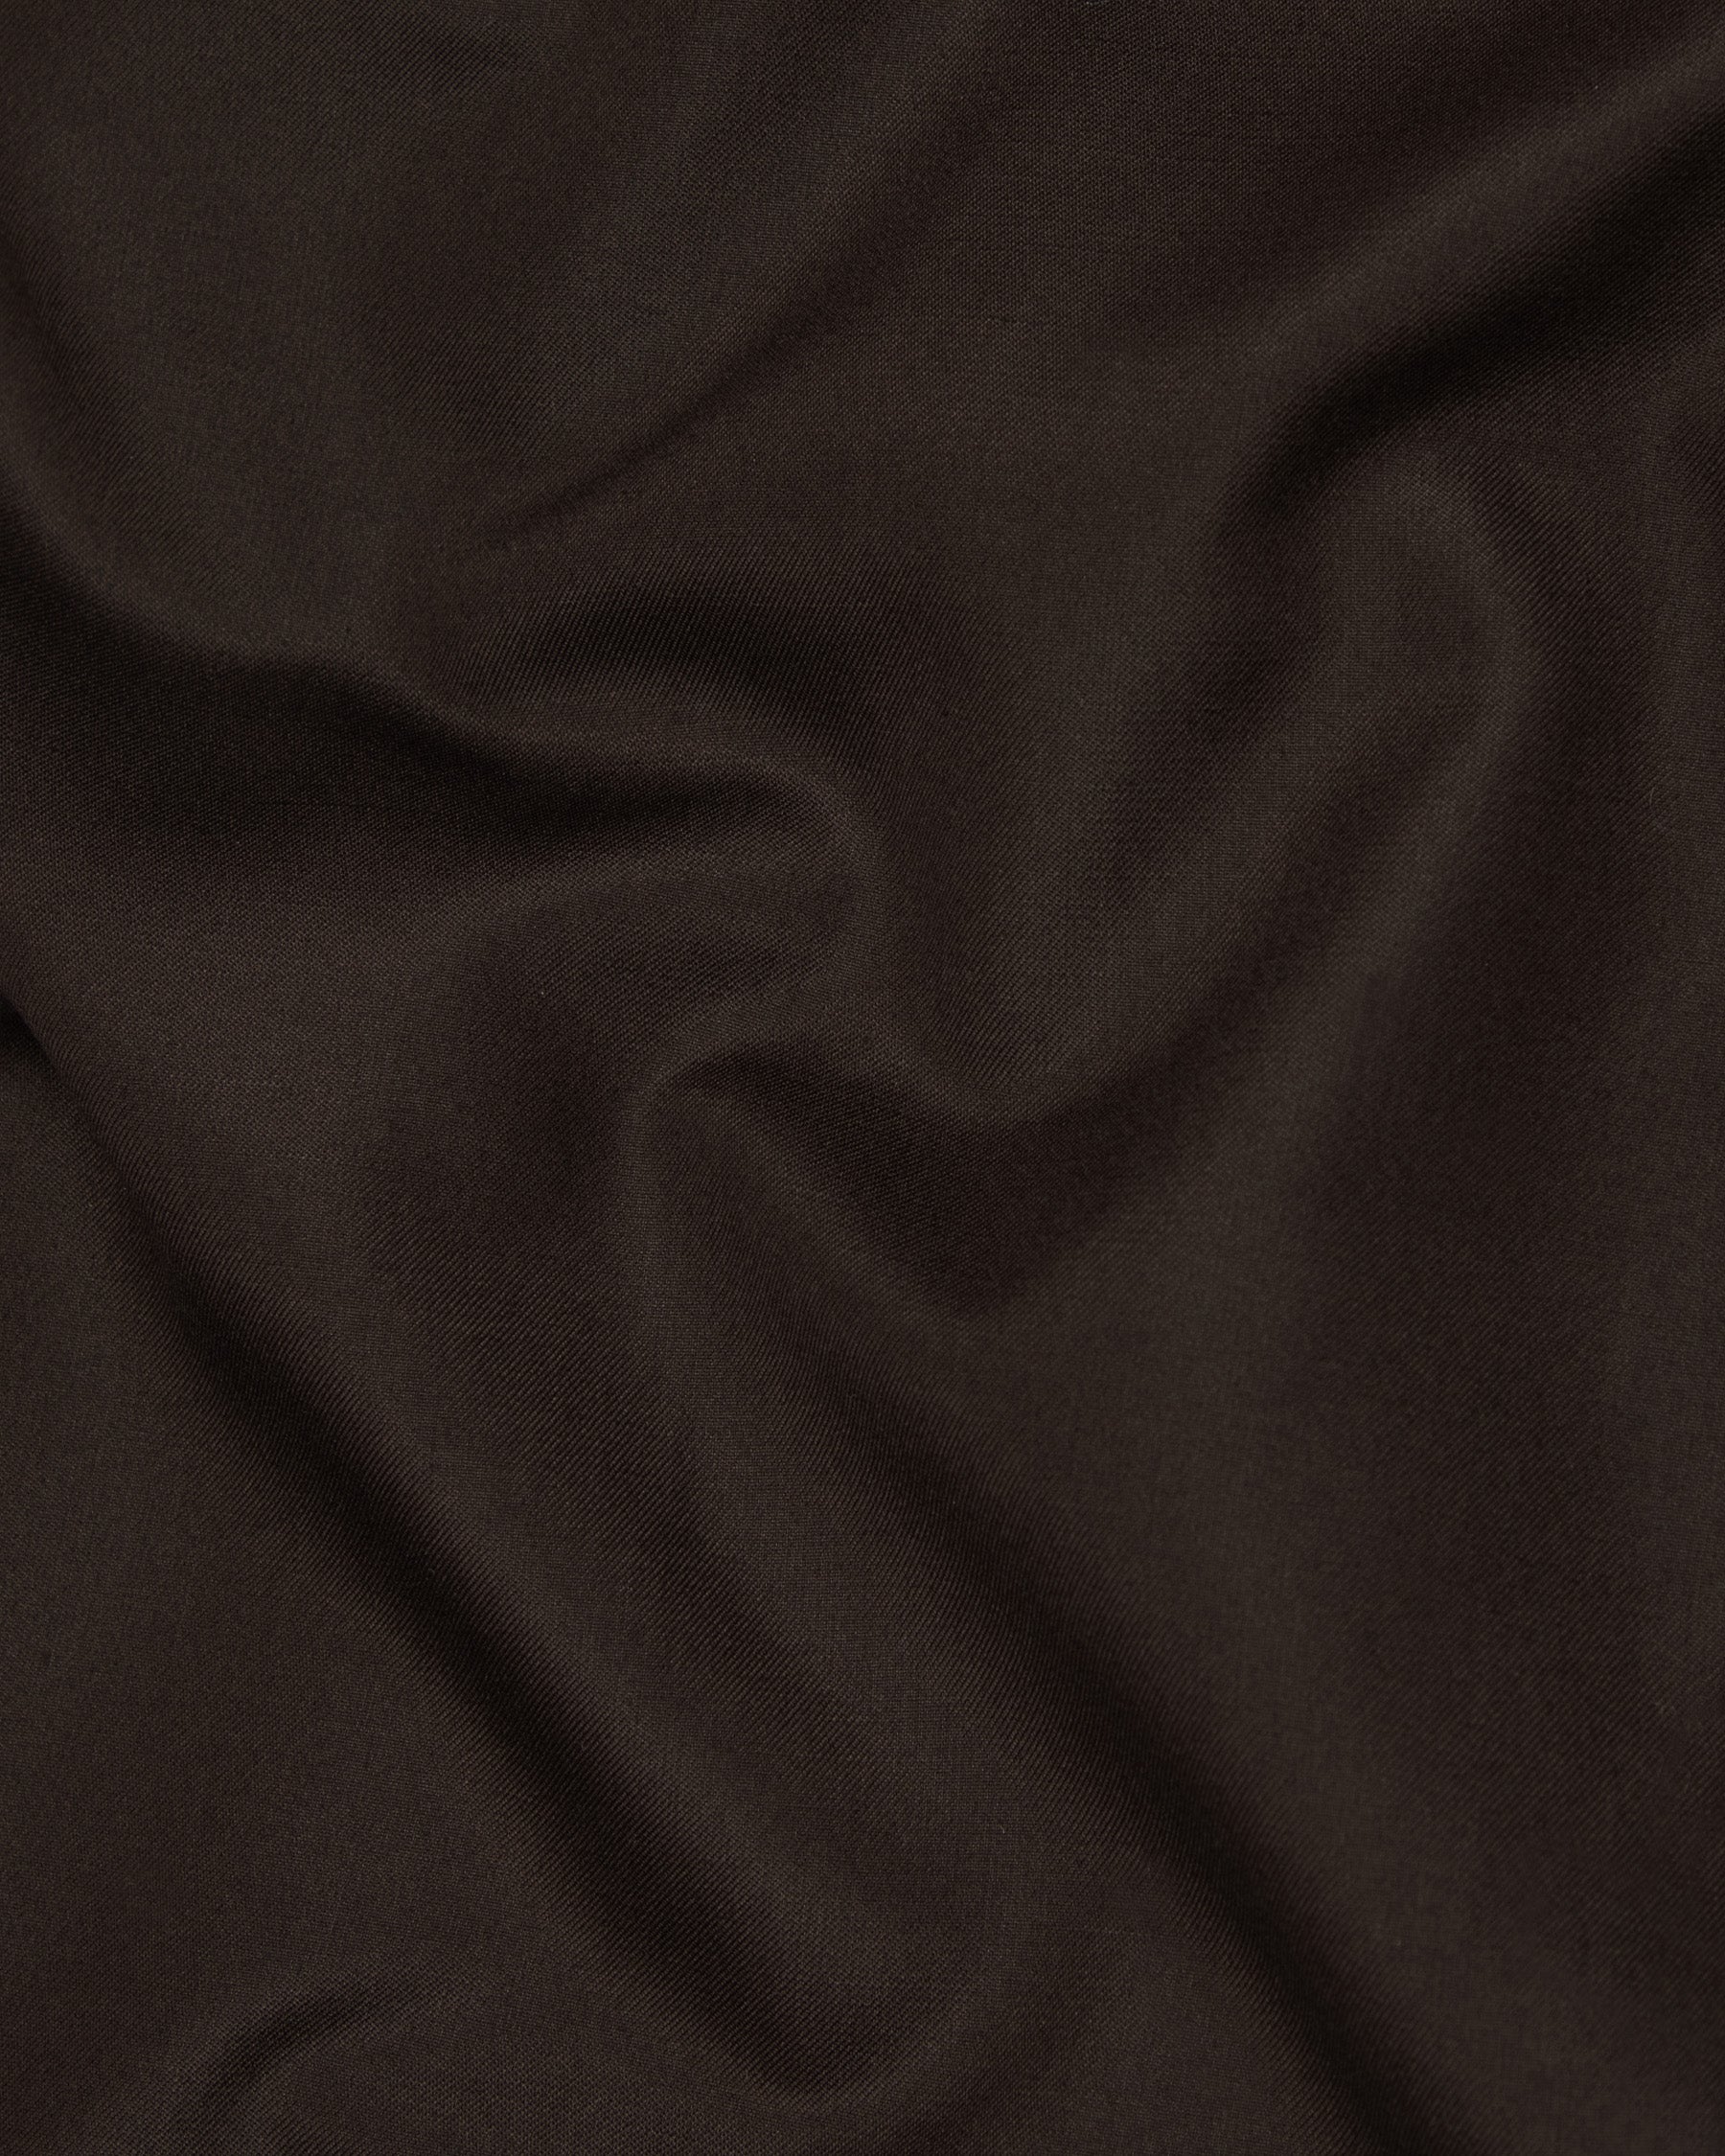 Cocoa Brown Wool Rich Tuxedo Suit ST1346-BKL-36, ST1346-BKL-38, ST1346-BKL-40, ST1346-BKL-42, ST1346-BKL-44, ST1346-BKL-46, ST1346-BKL-48, ST1346-BKL-50, ST1346-BKL-52, ST1346-BKL-54, ST1346-BKL-56, ST1346-BKL-58, ST1346-BKL-60